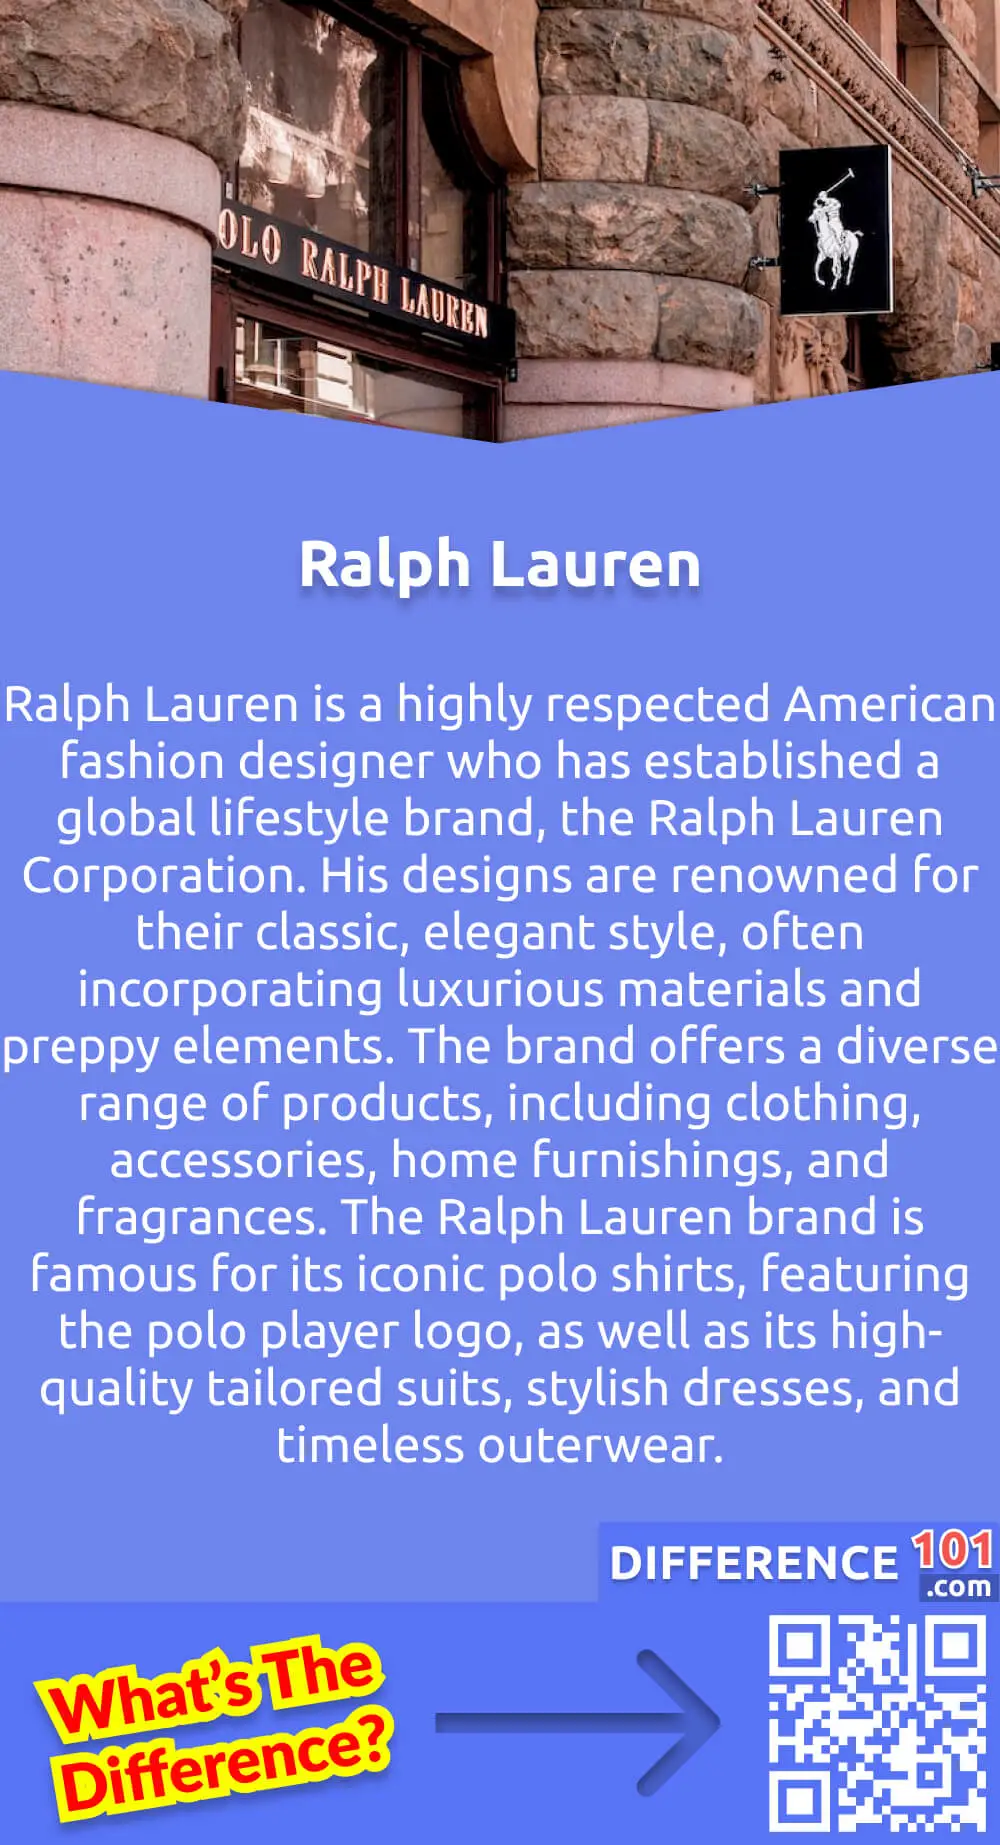 What Is Ralph Lauren? Ralph Lauren is a highly respected American fashion designer who has established a global lifestyle brand, the Ralph Lauren Corporation. His designs are renowned for their classic, elegant style, often incorporating luxurious materials and preppy elements. The brand offers a diverse range of products, including clothing, accessories, home furnishings, and fragrances. The Ralph Lauren brand is famous for its iconic polo shirts, featuring the polo player logo, as well as its high-quality tailored suits, stylish dresses, and timeless outerwear. With a focus on quality and attention to detail, Ralph Lauren has become a household name in the fashion industry.